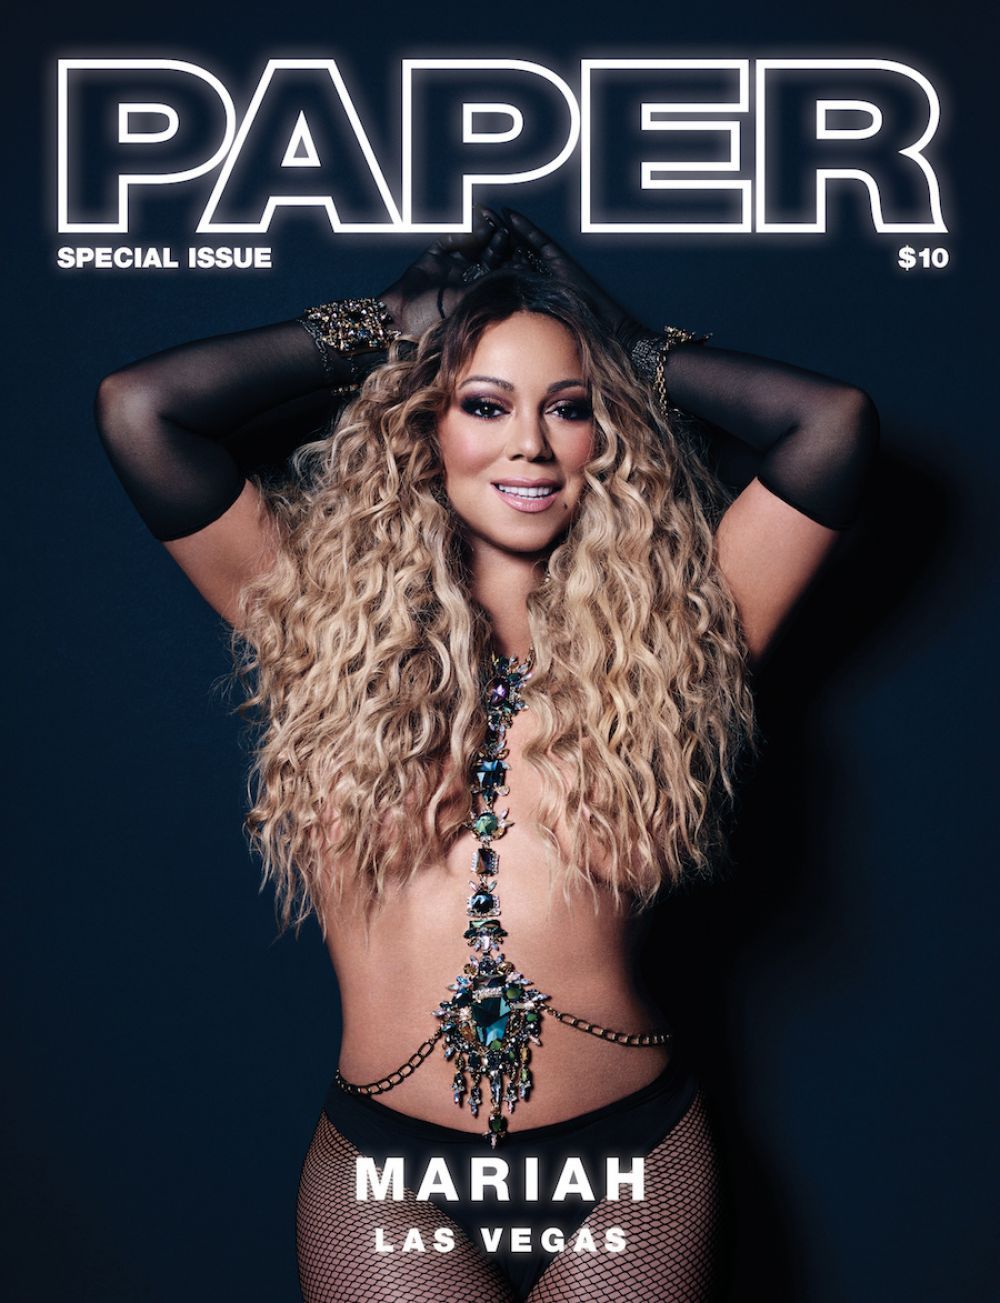 Mariah Carey on the cover of Paper Magazine